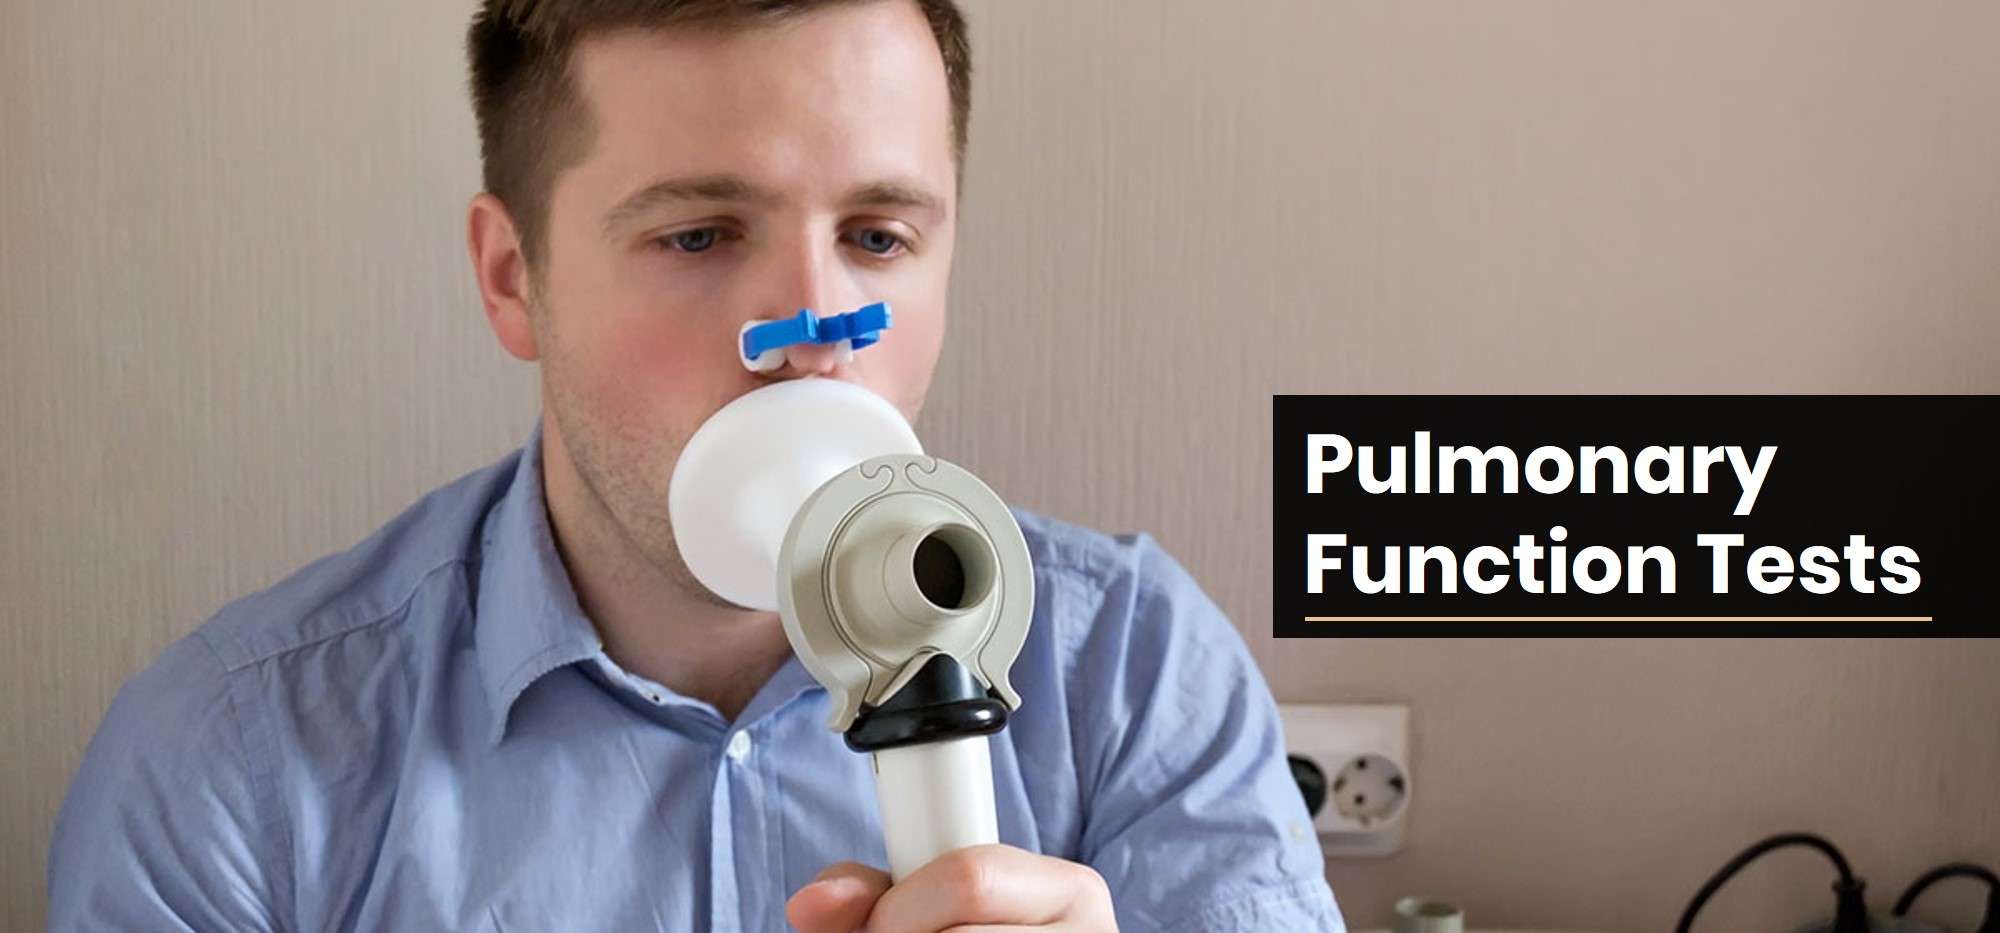 Pulmonary Function Tests (PFTs)